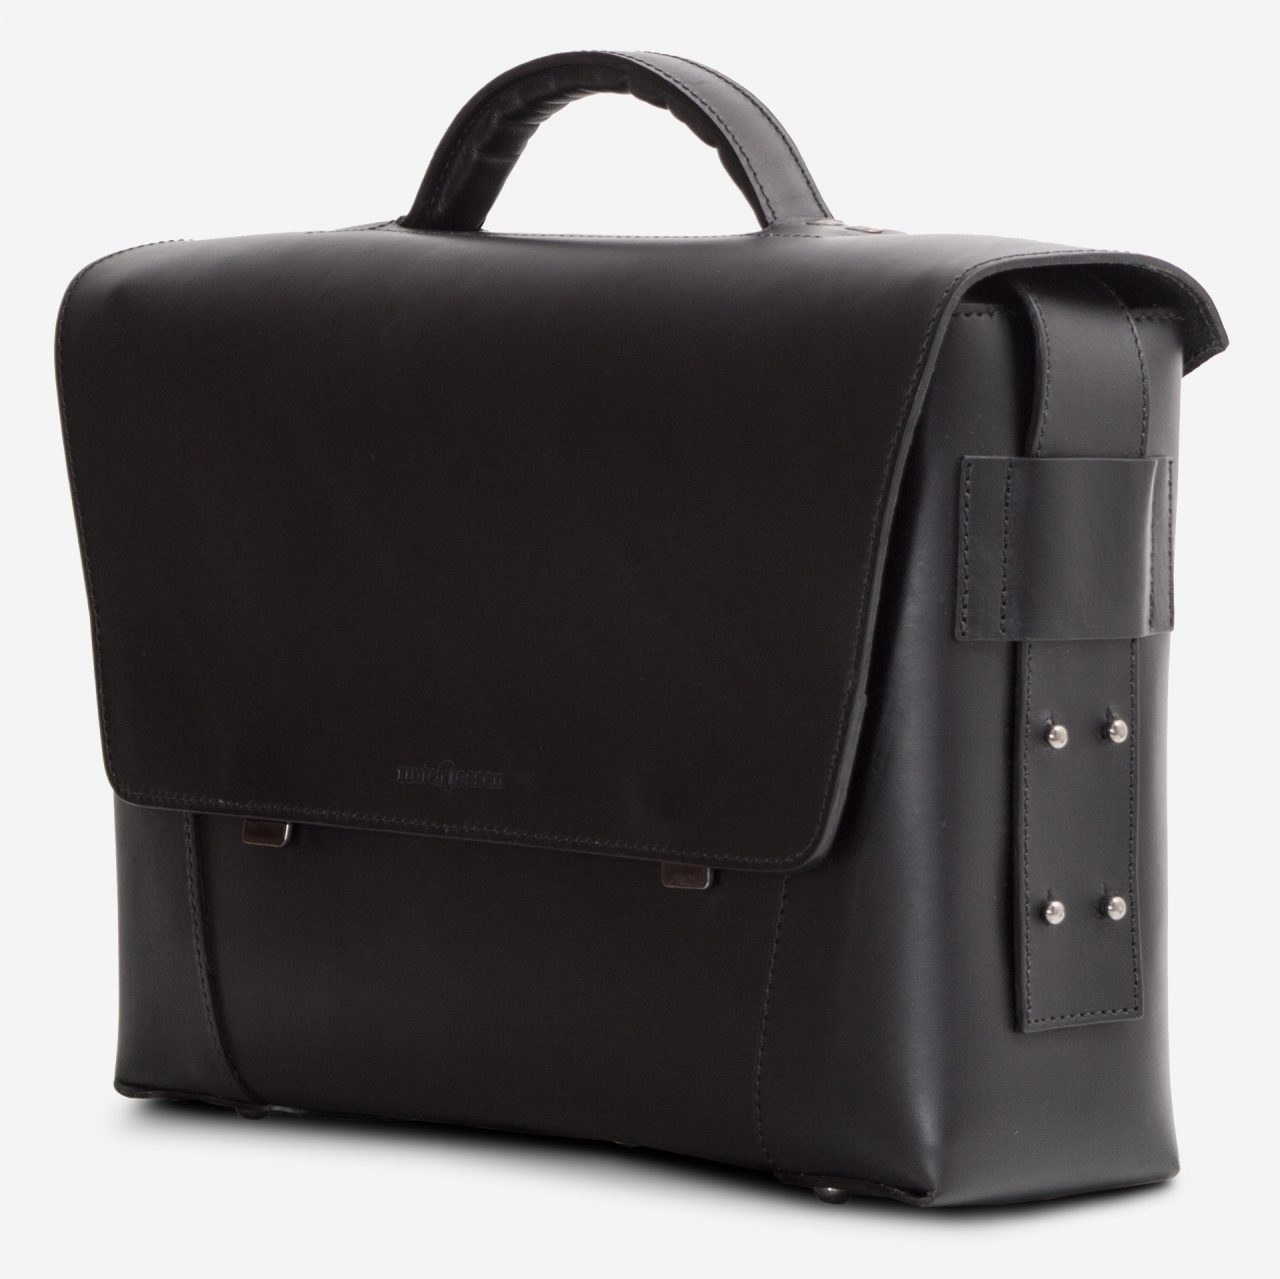 Side view of the black vegetable-tanned leather briefcase bag with laptop pocket.